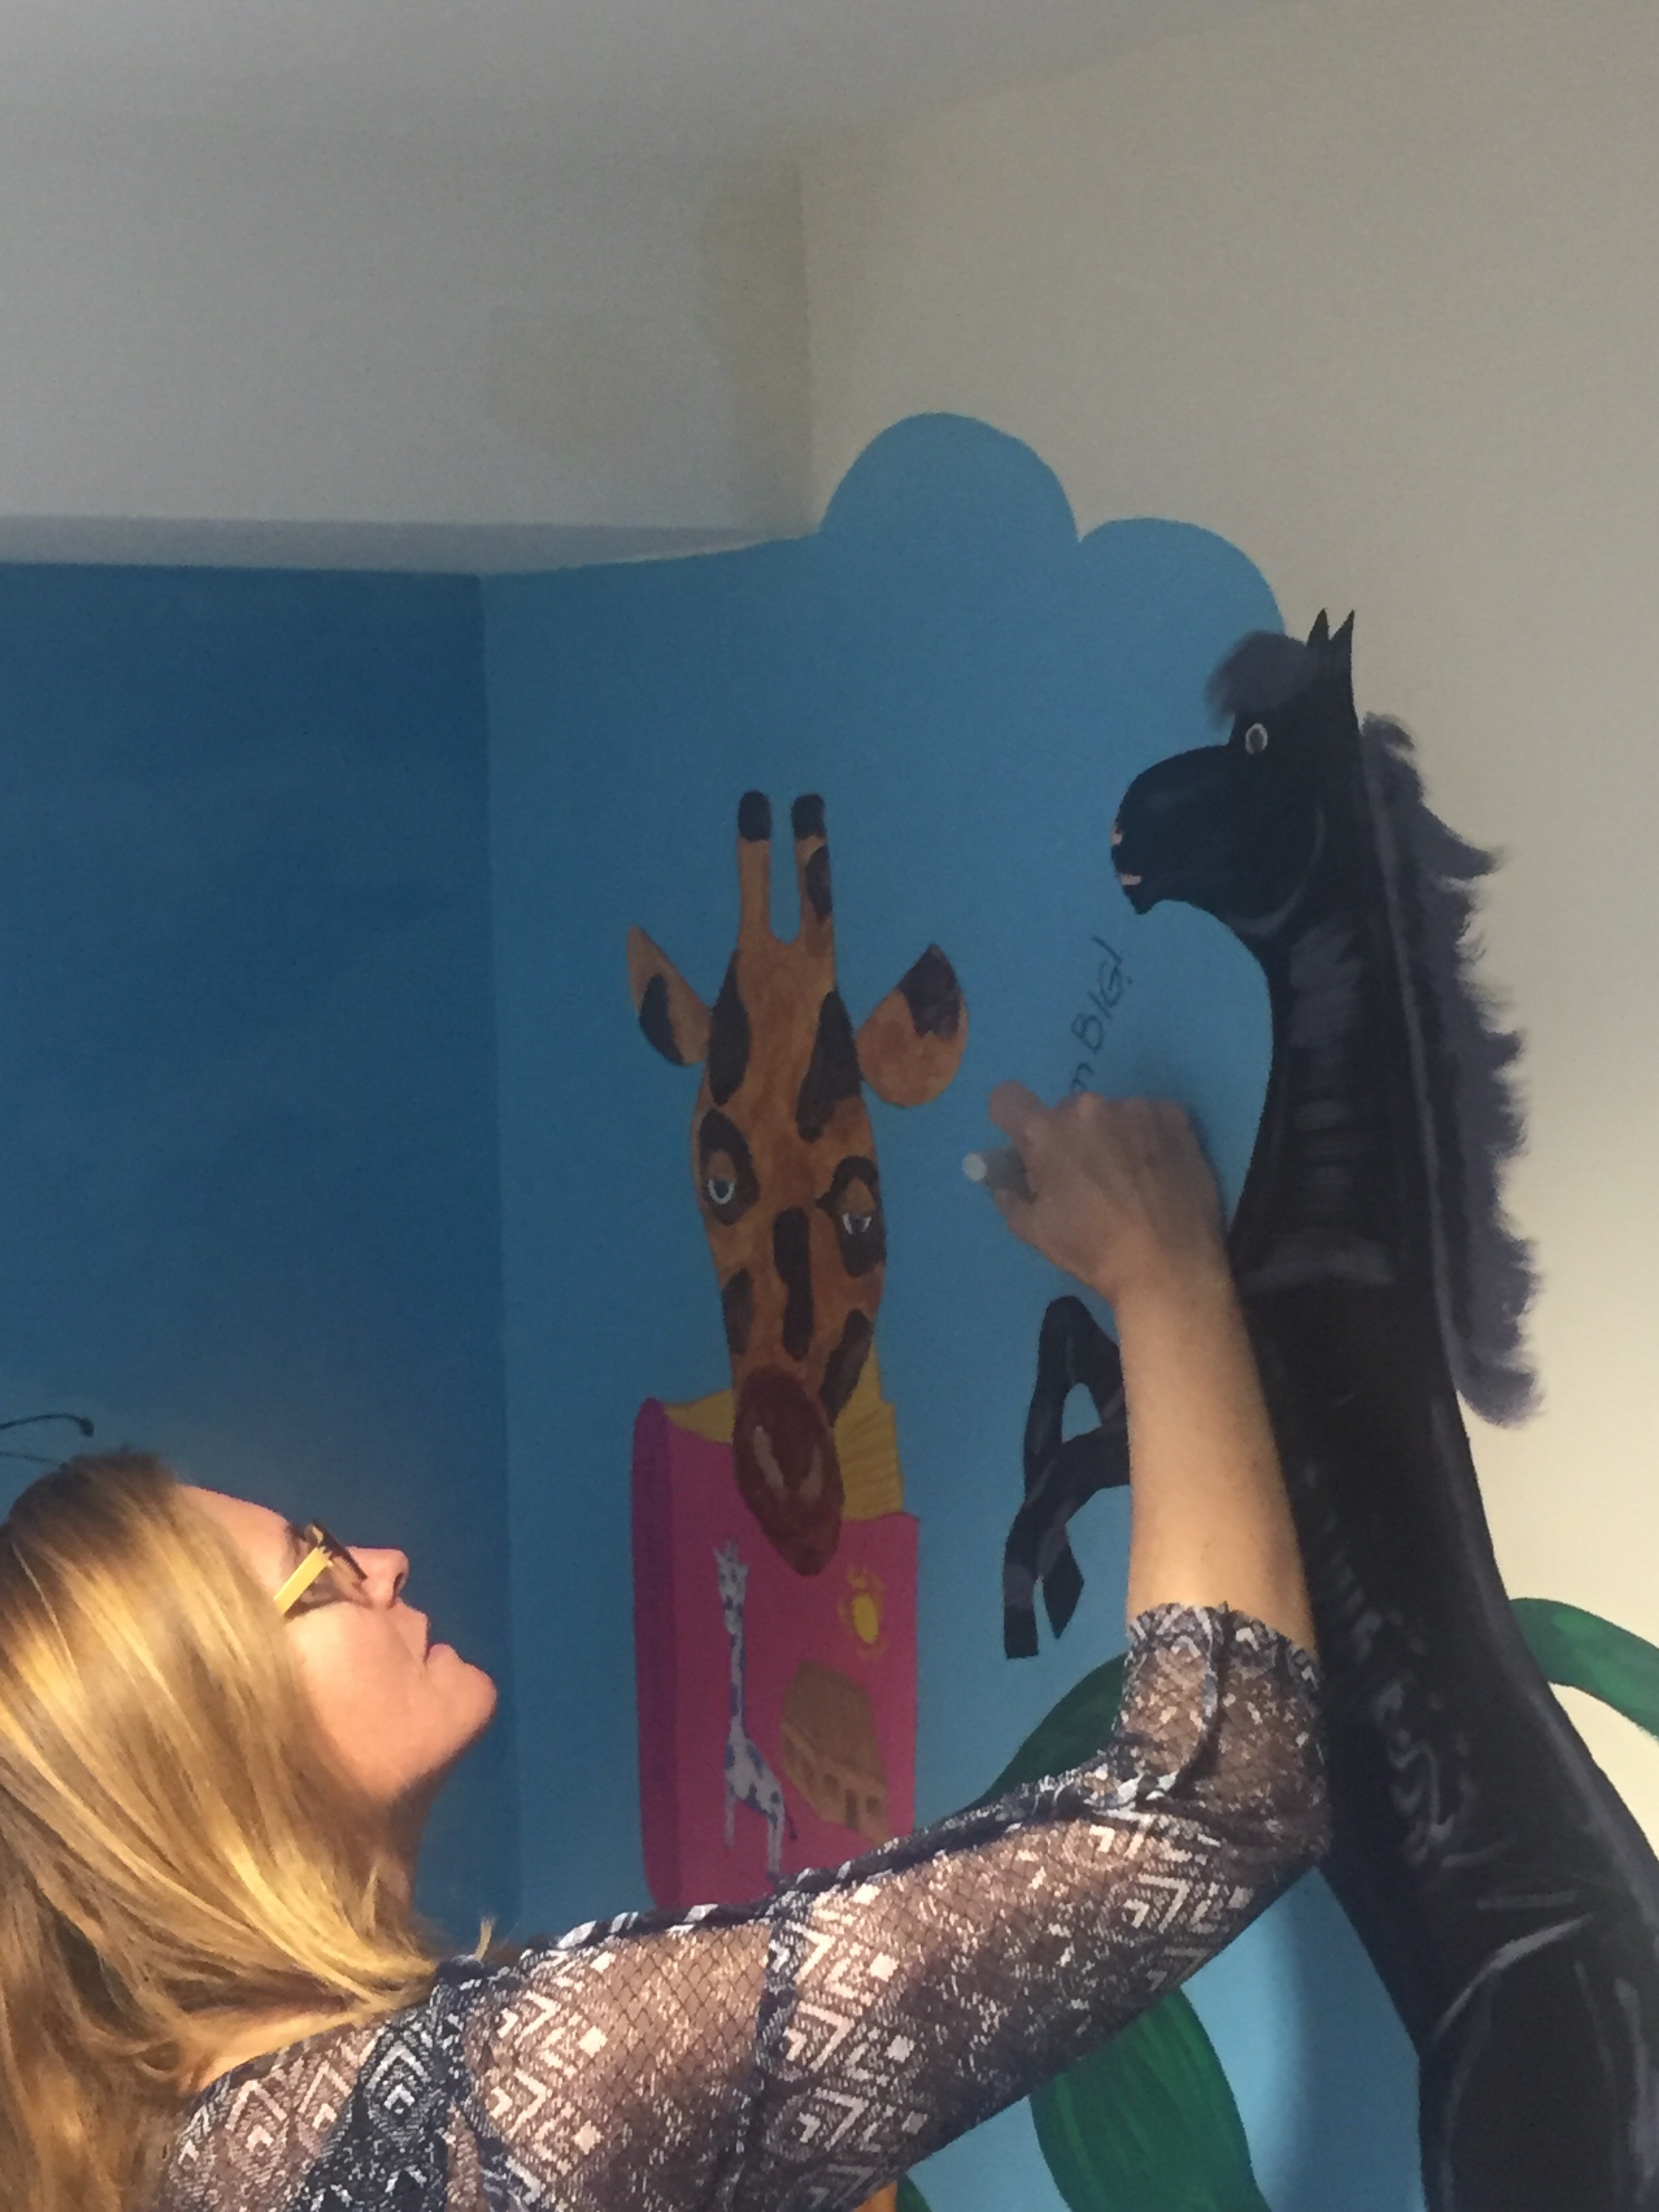 signing the school mural:)